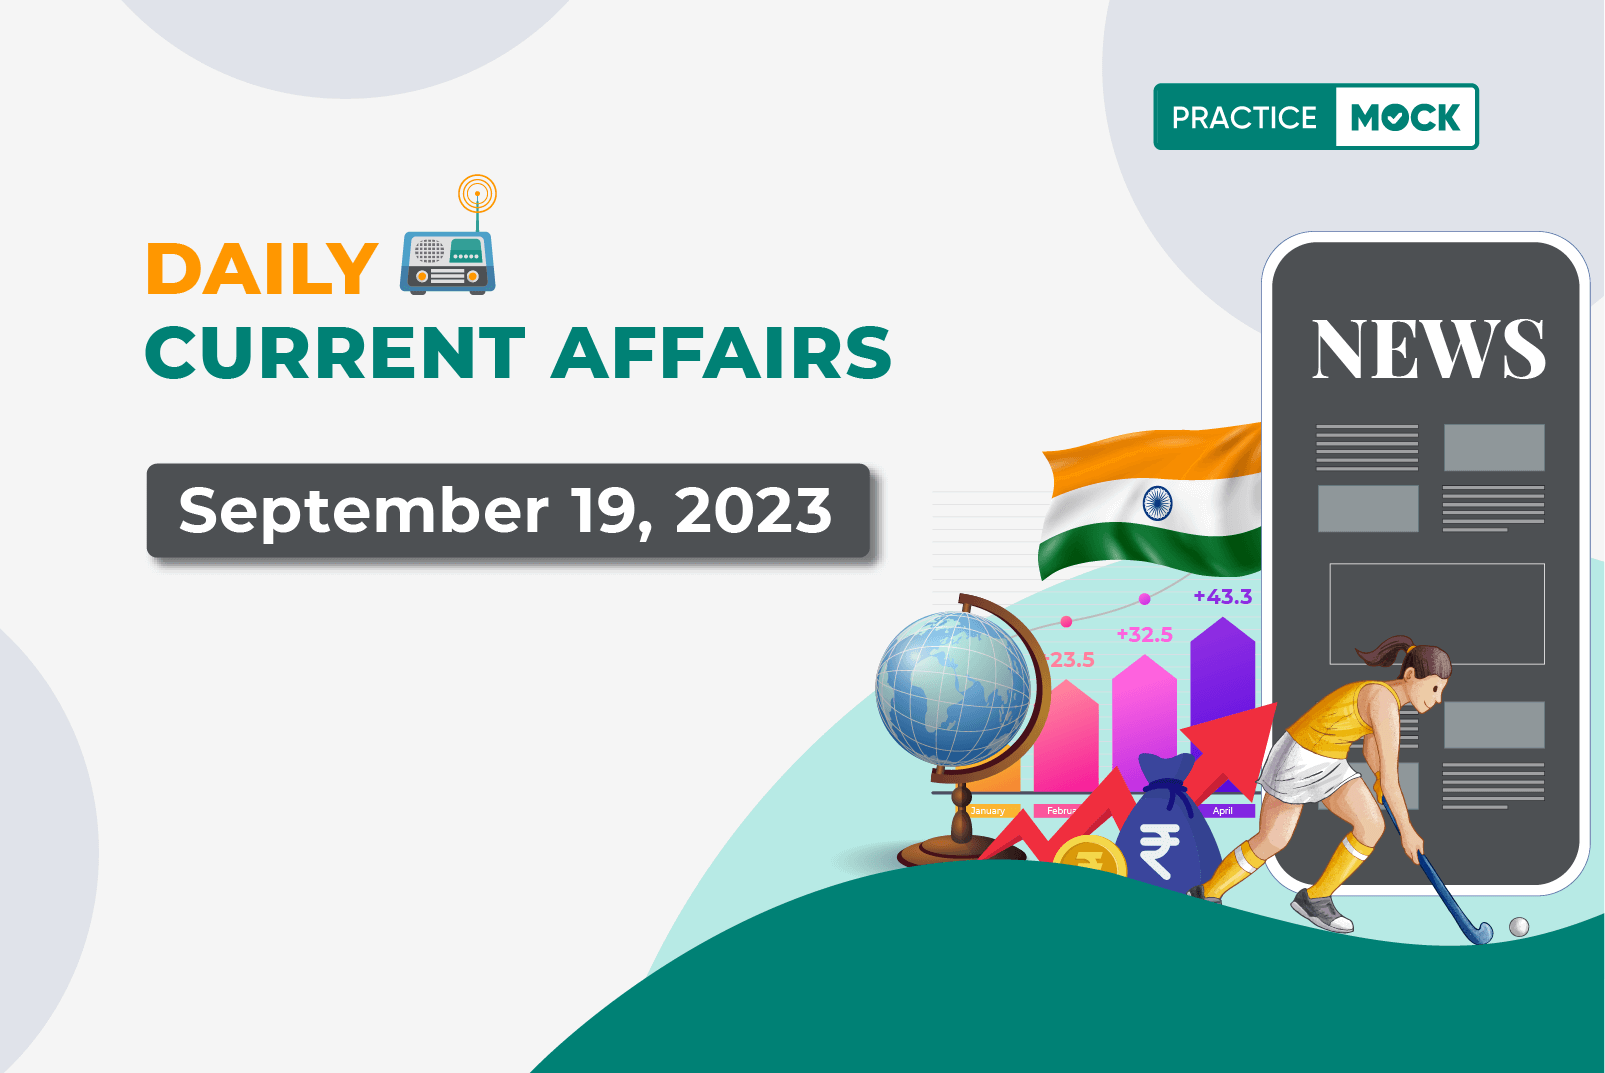 Daily Current Affairs- September 19, 2023